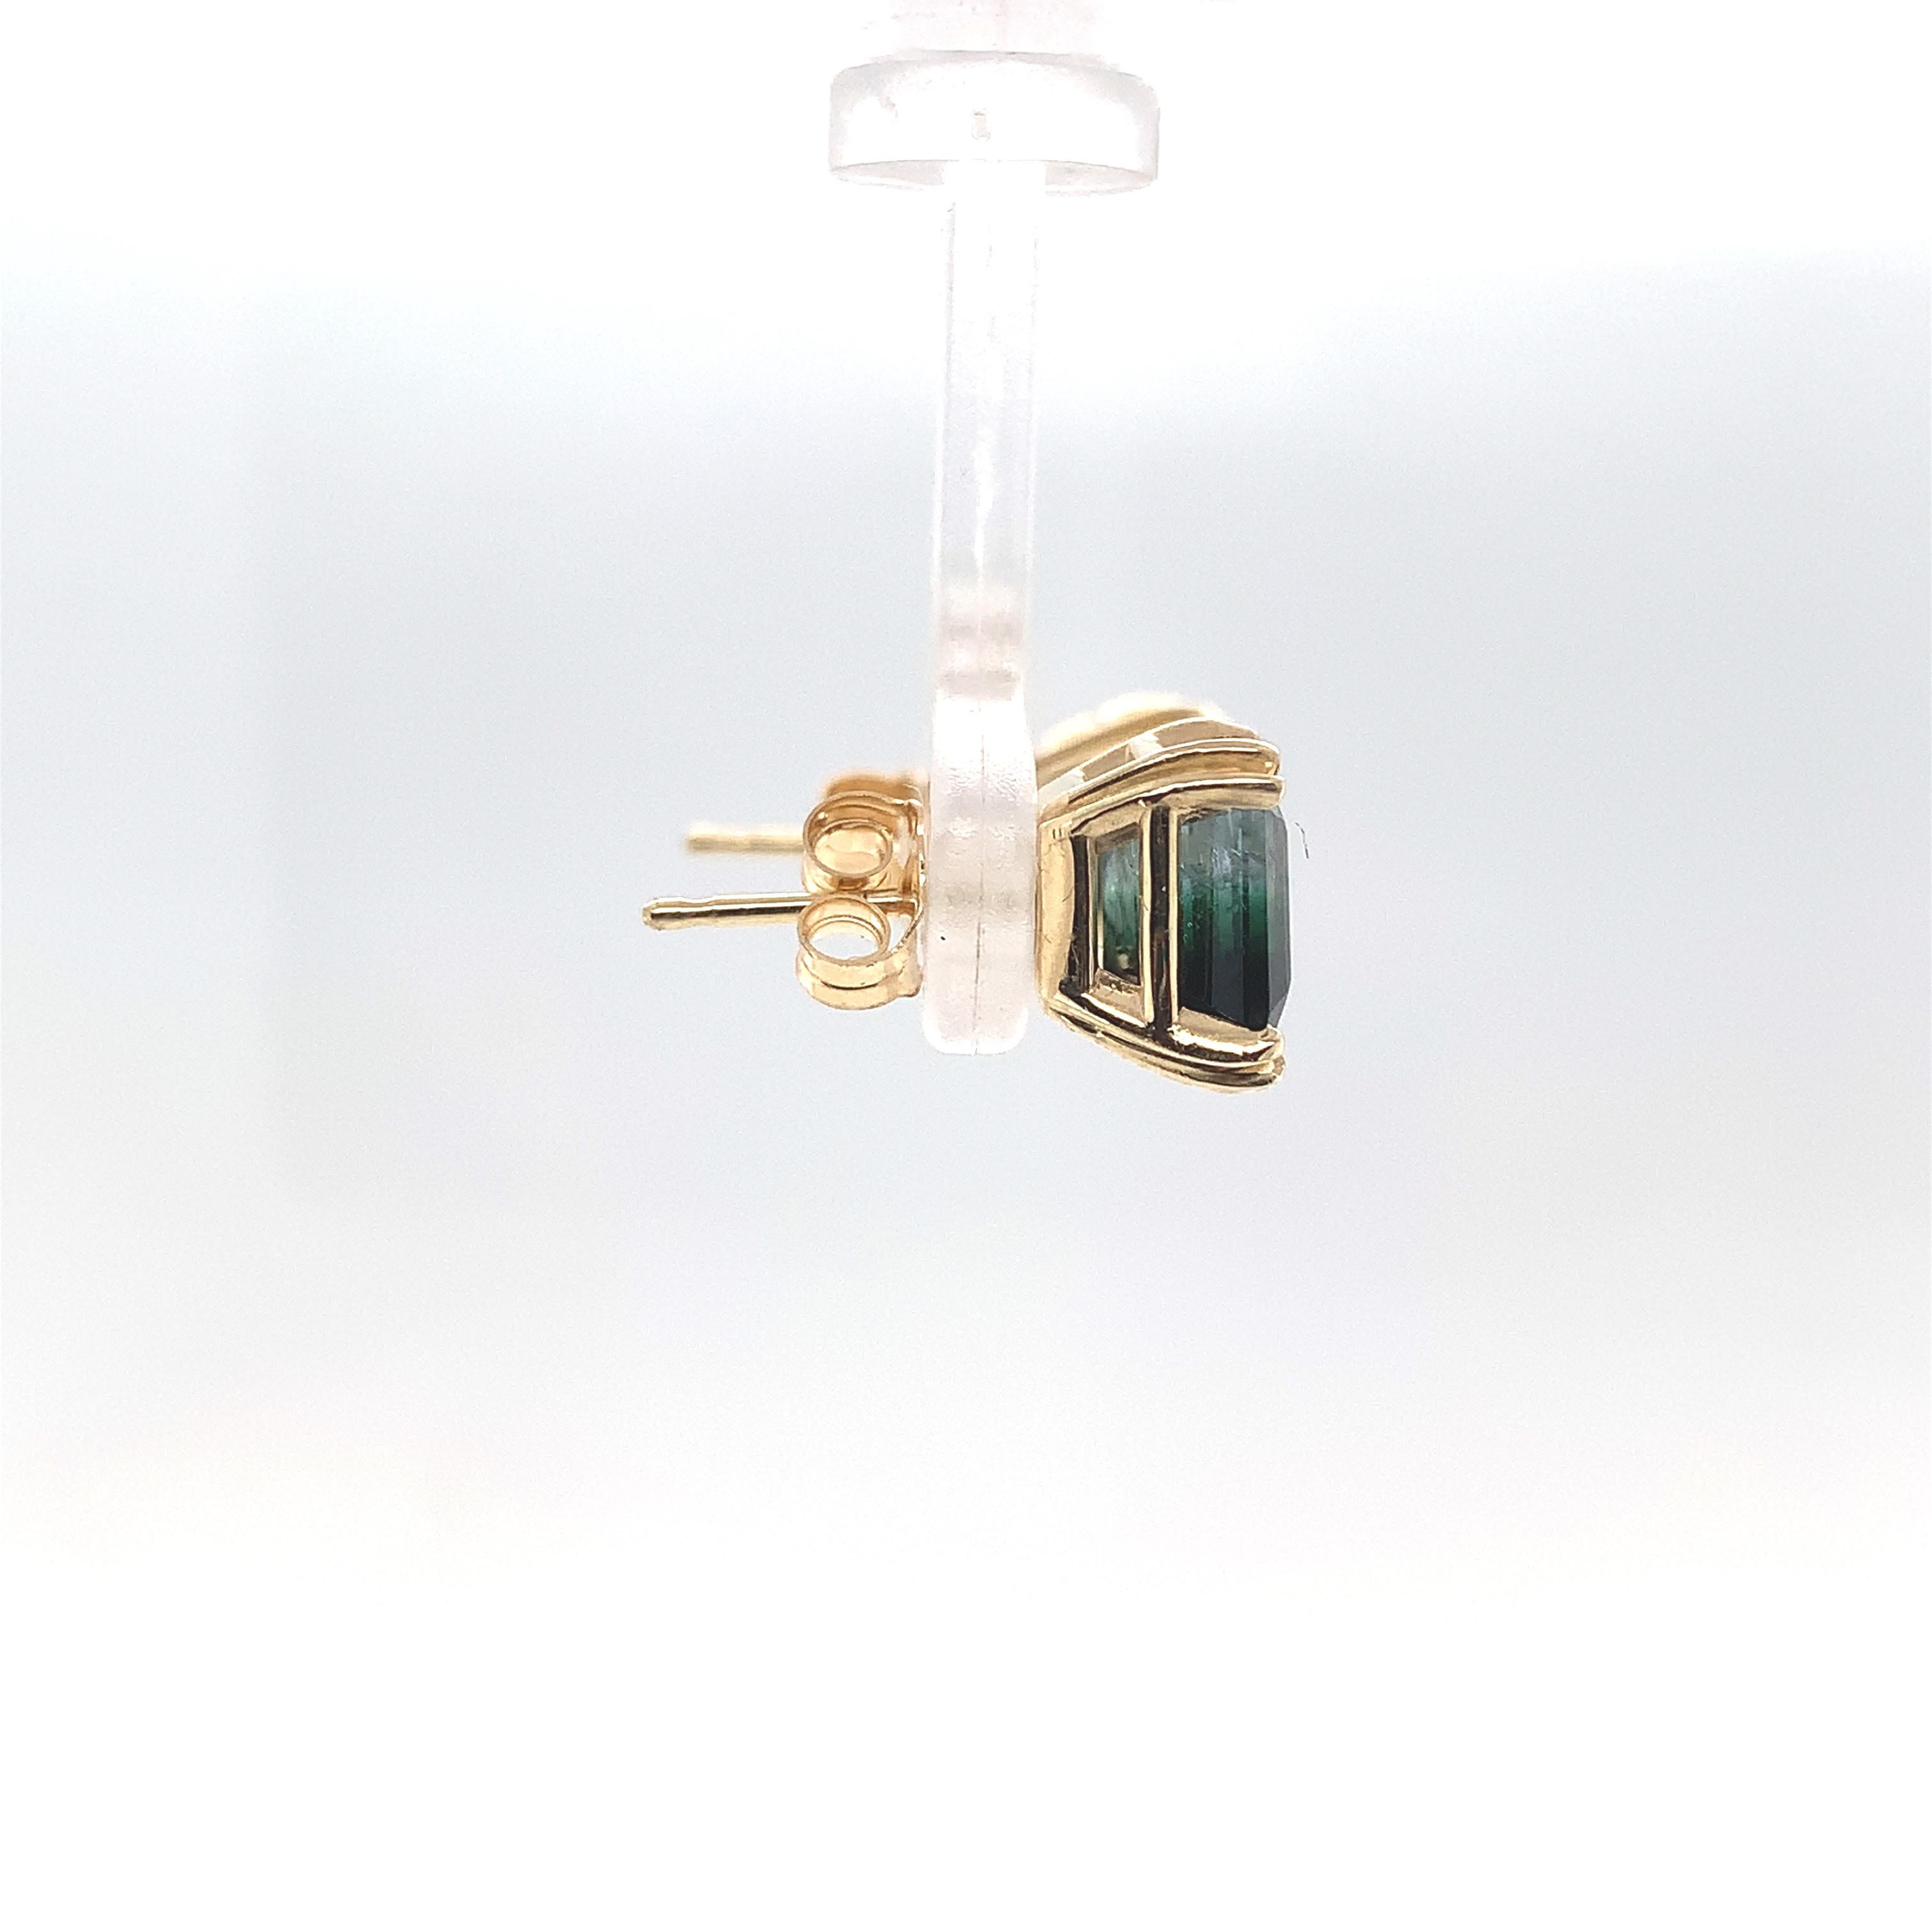 A pair of 14K yellow gold stud earrings featuring a pair of bi-color tourmalines. The tourmalines have color from clear to green to very dark green, almost black. The tourmalines are square step cut and measure about 7.3mm. The pair of tourmalines